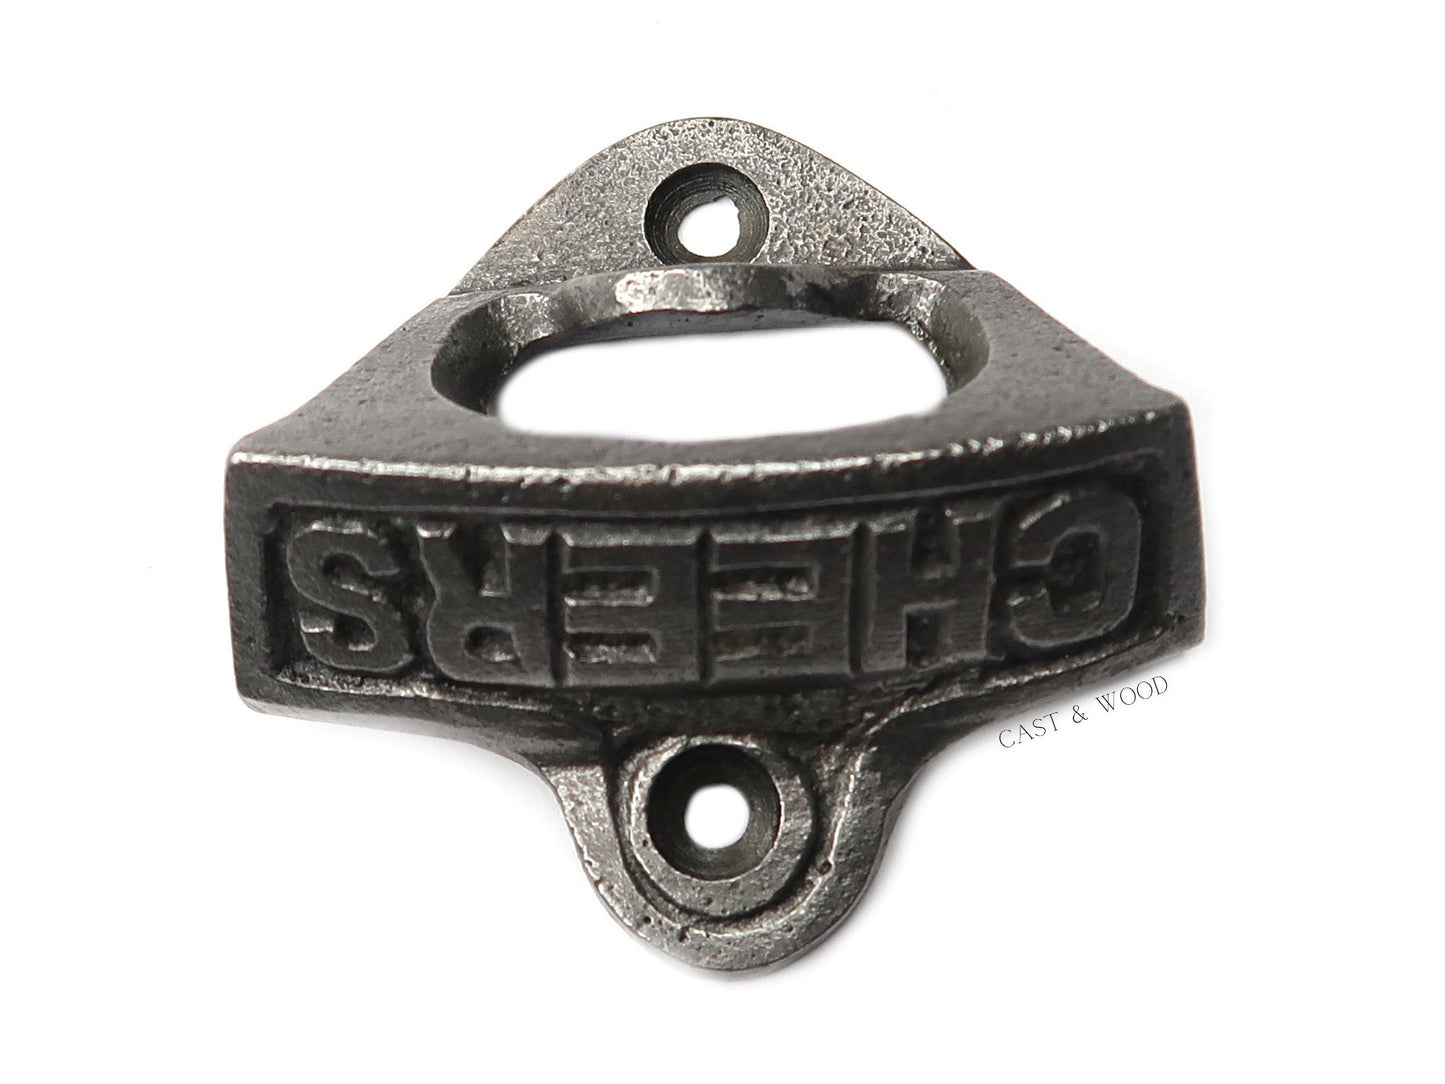 CHEERS Cast Iron Wall Mounted Bottle Opener freeshipping - Cast & Wood